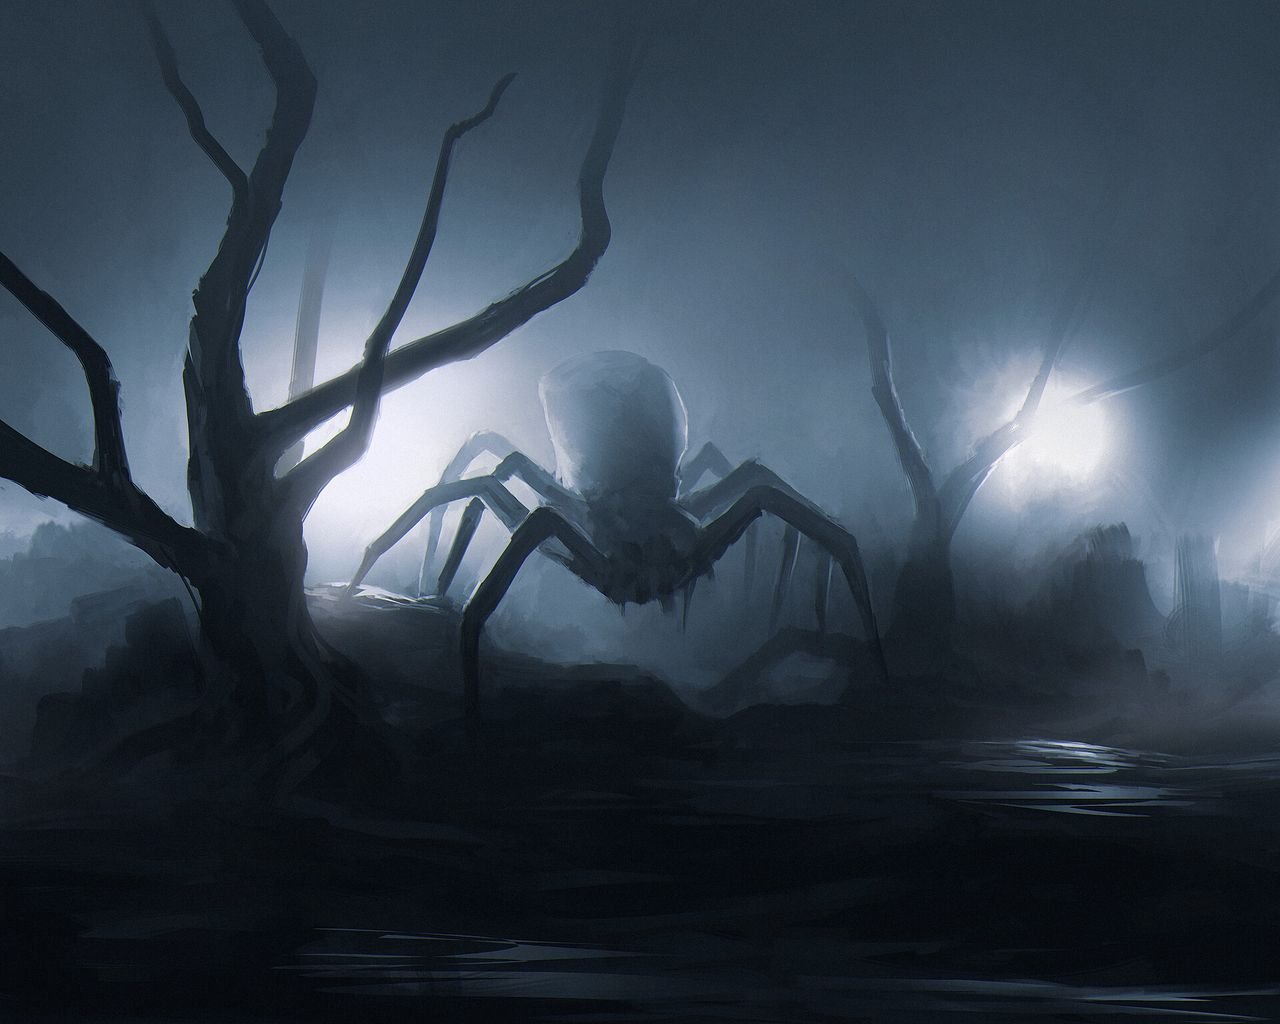 Download wallpaper 1280x1024 spider, insect, trees, art, scary standard 5:4 HD background